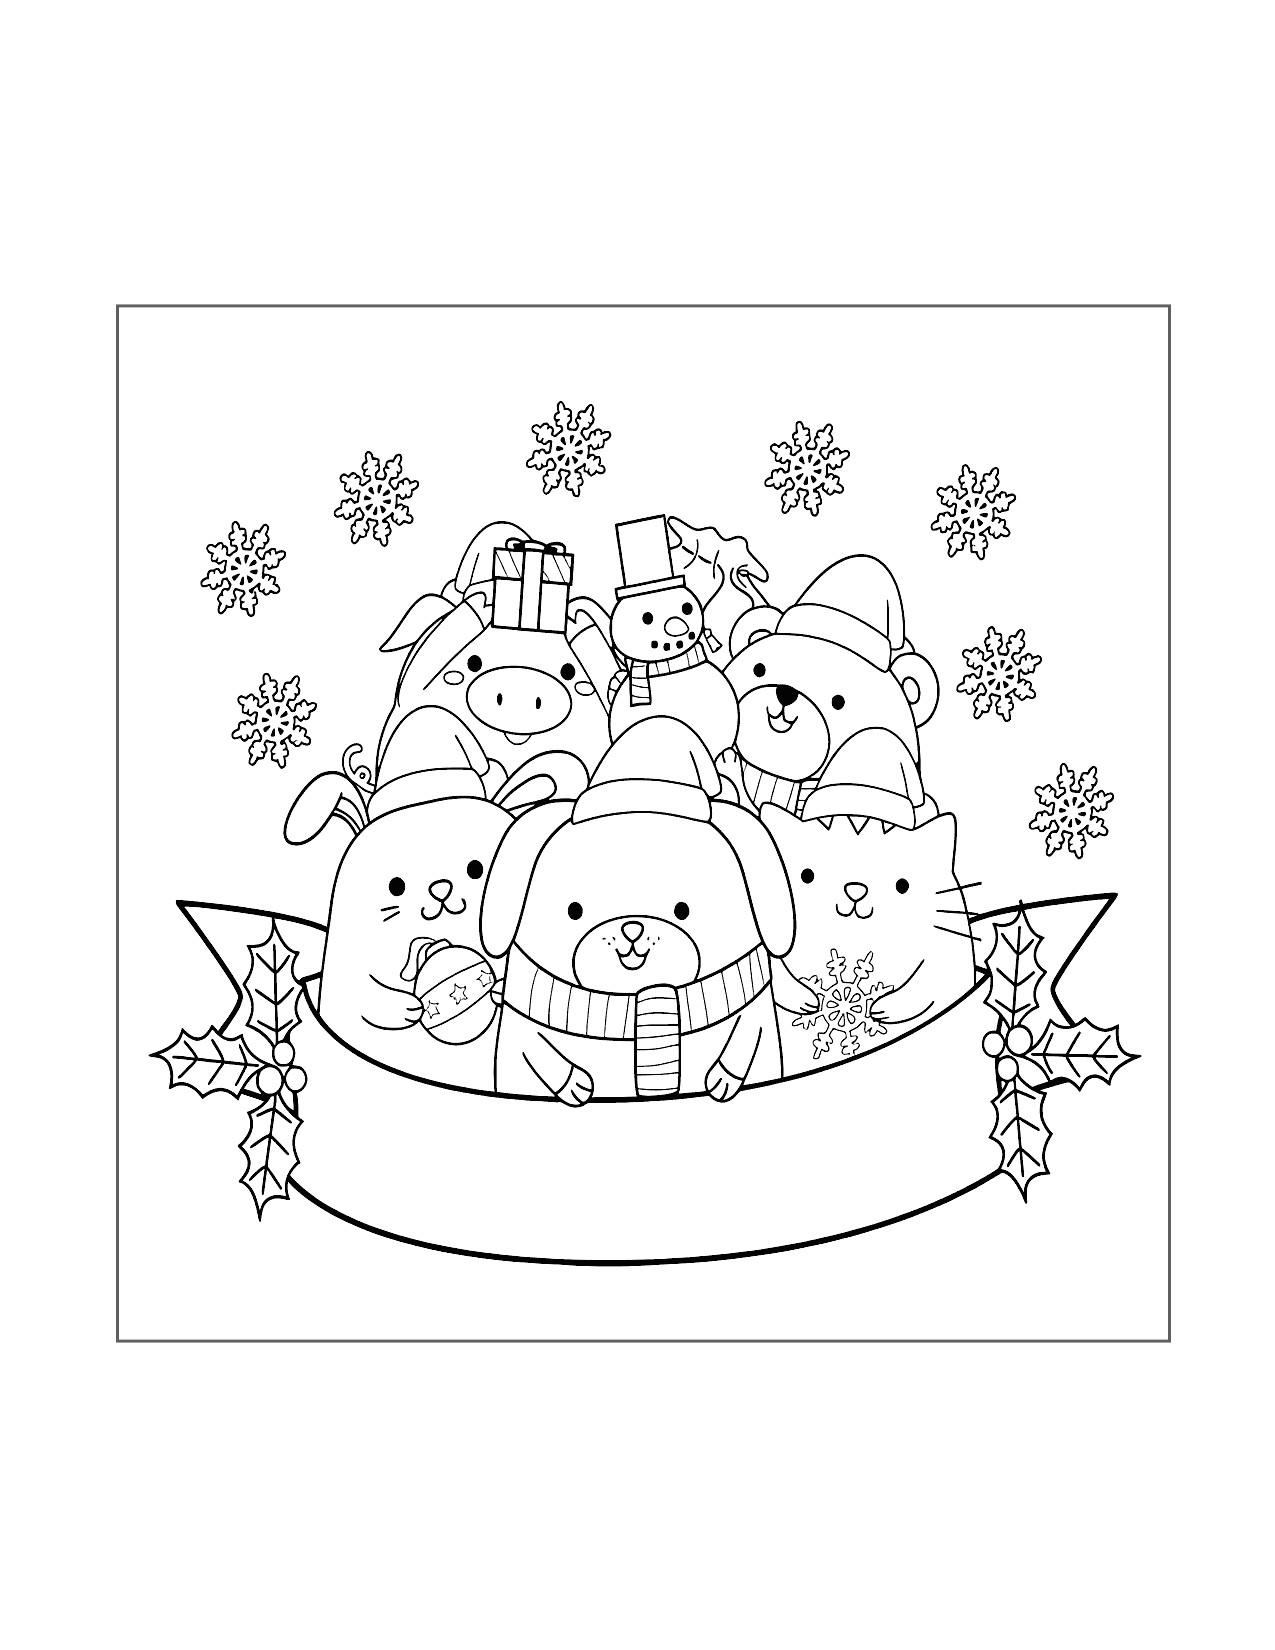 The Cutest Christmas Animals Coloring Page